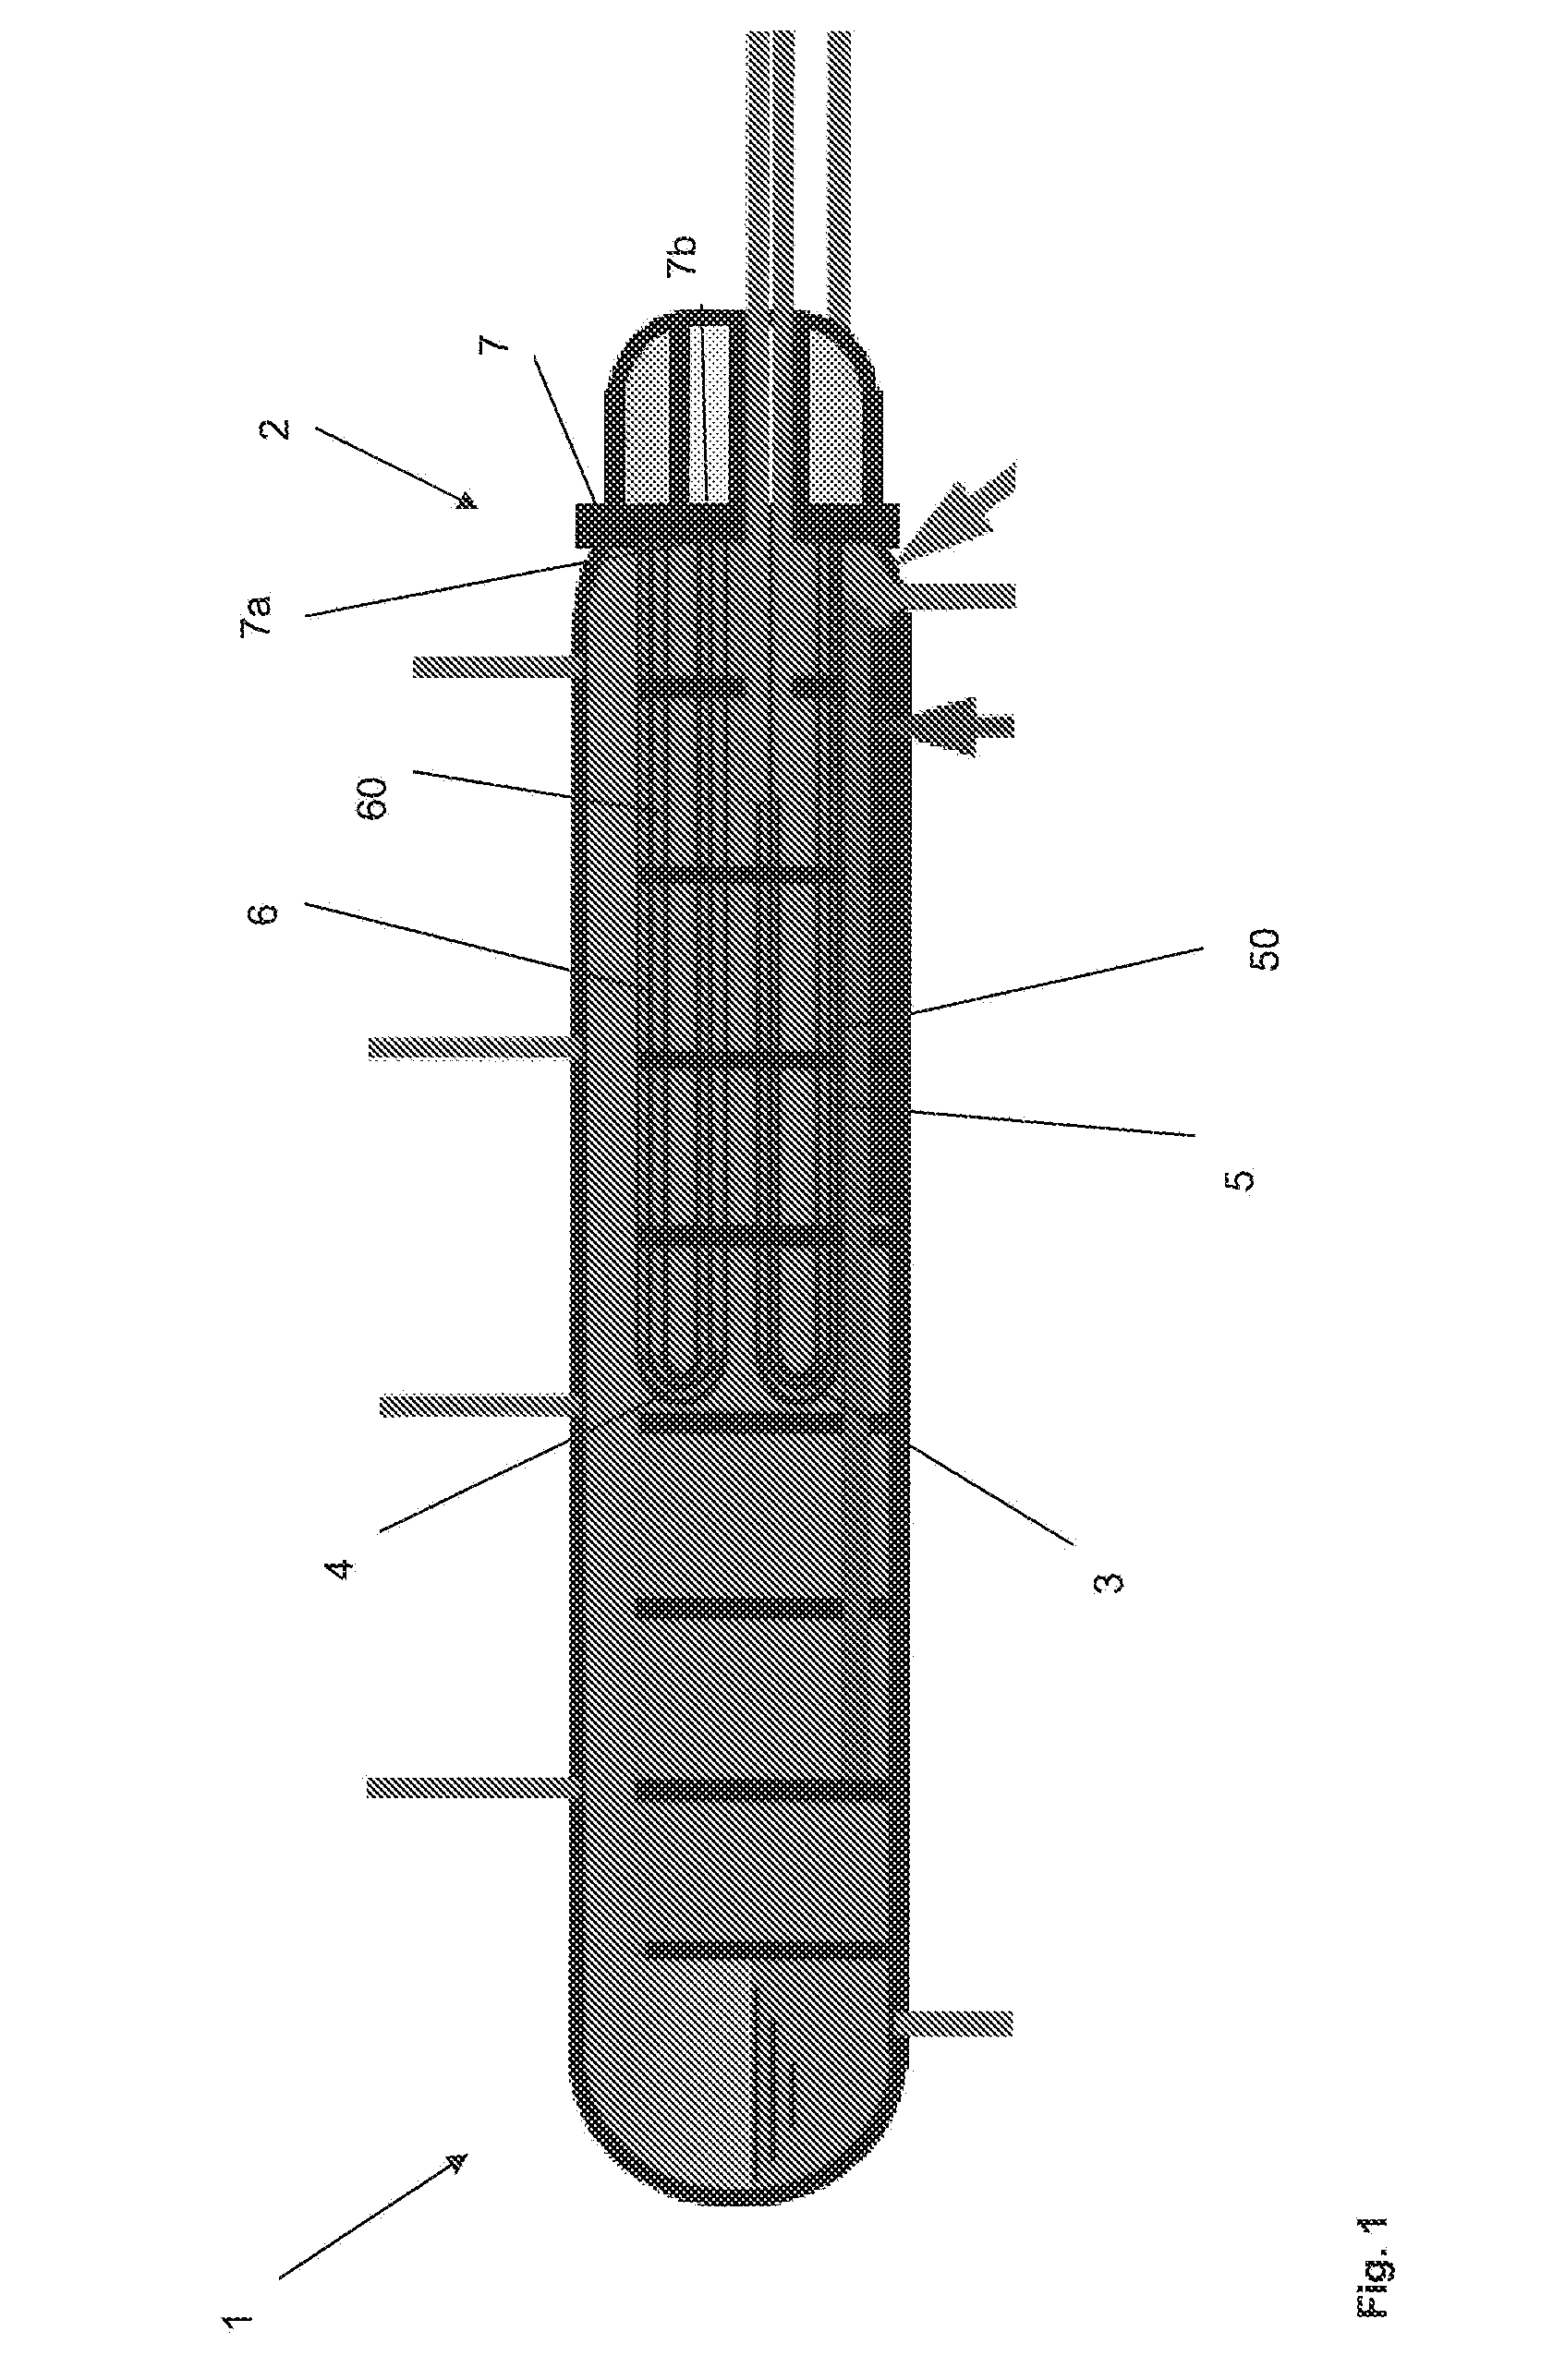 Method for manufacturing a tube sheet and heat exchanger assembly for a pool reactor or pool condenser; corresponding tube sheet and heat exchanger assembly